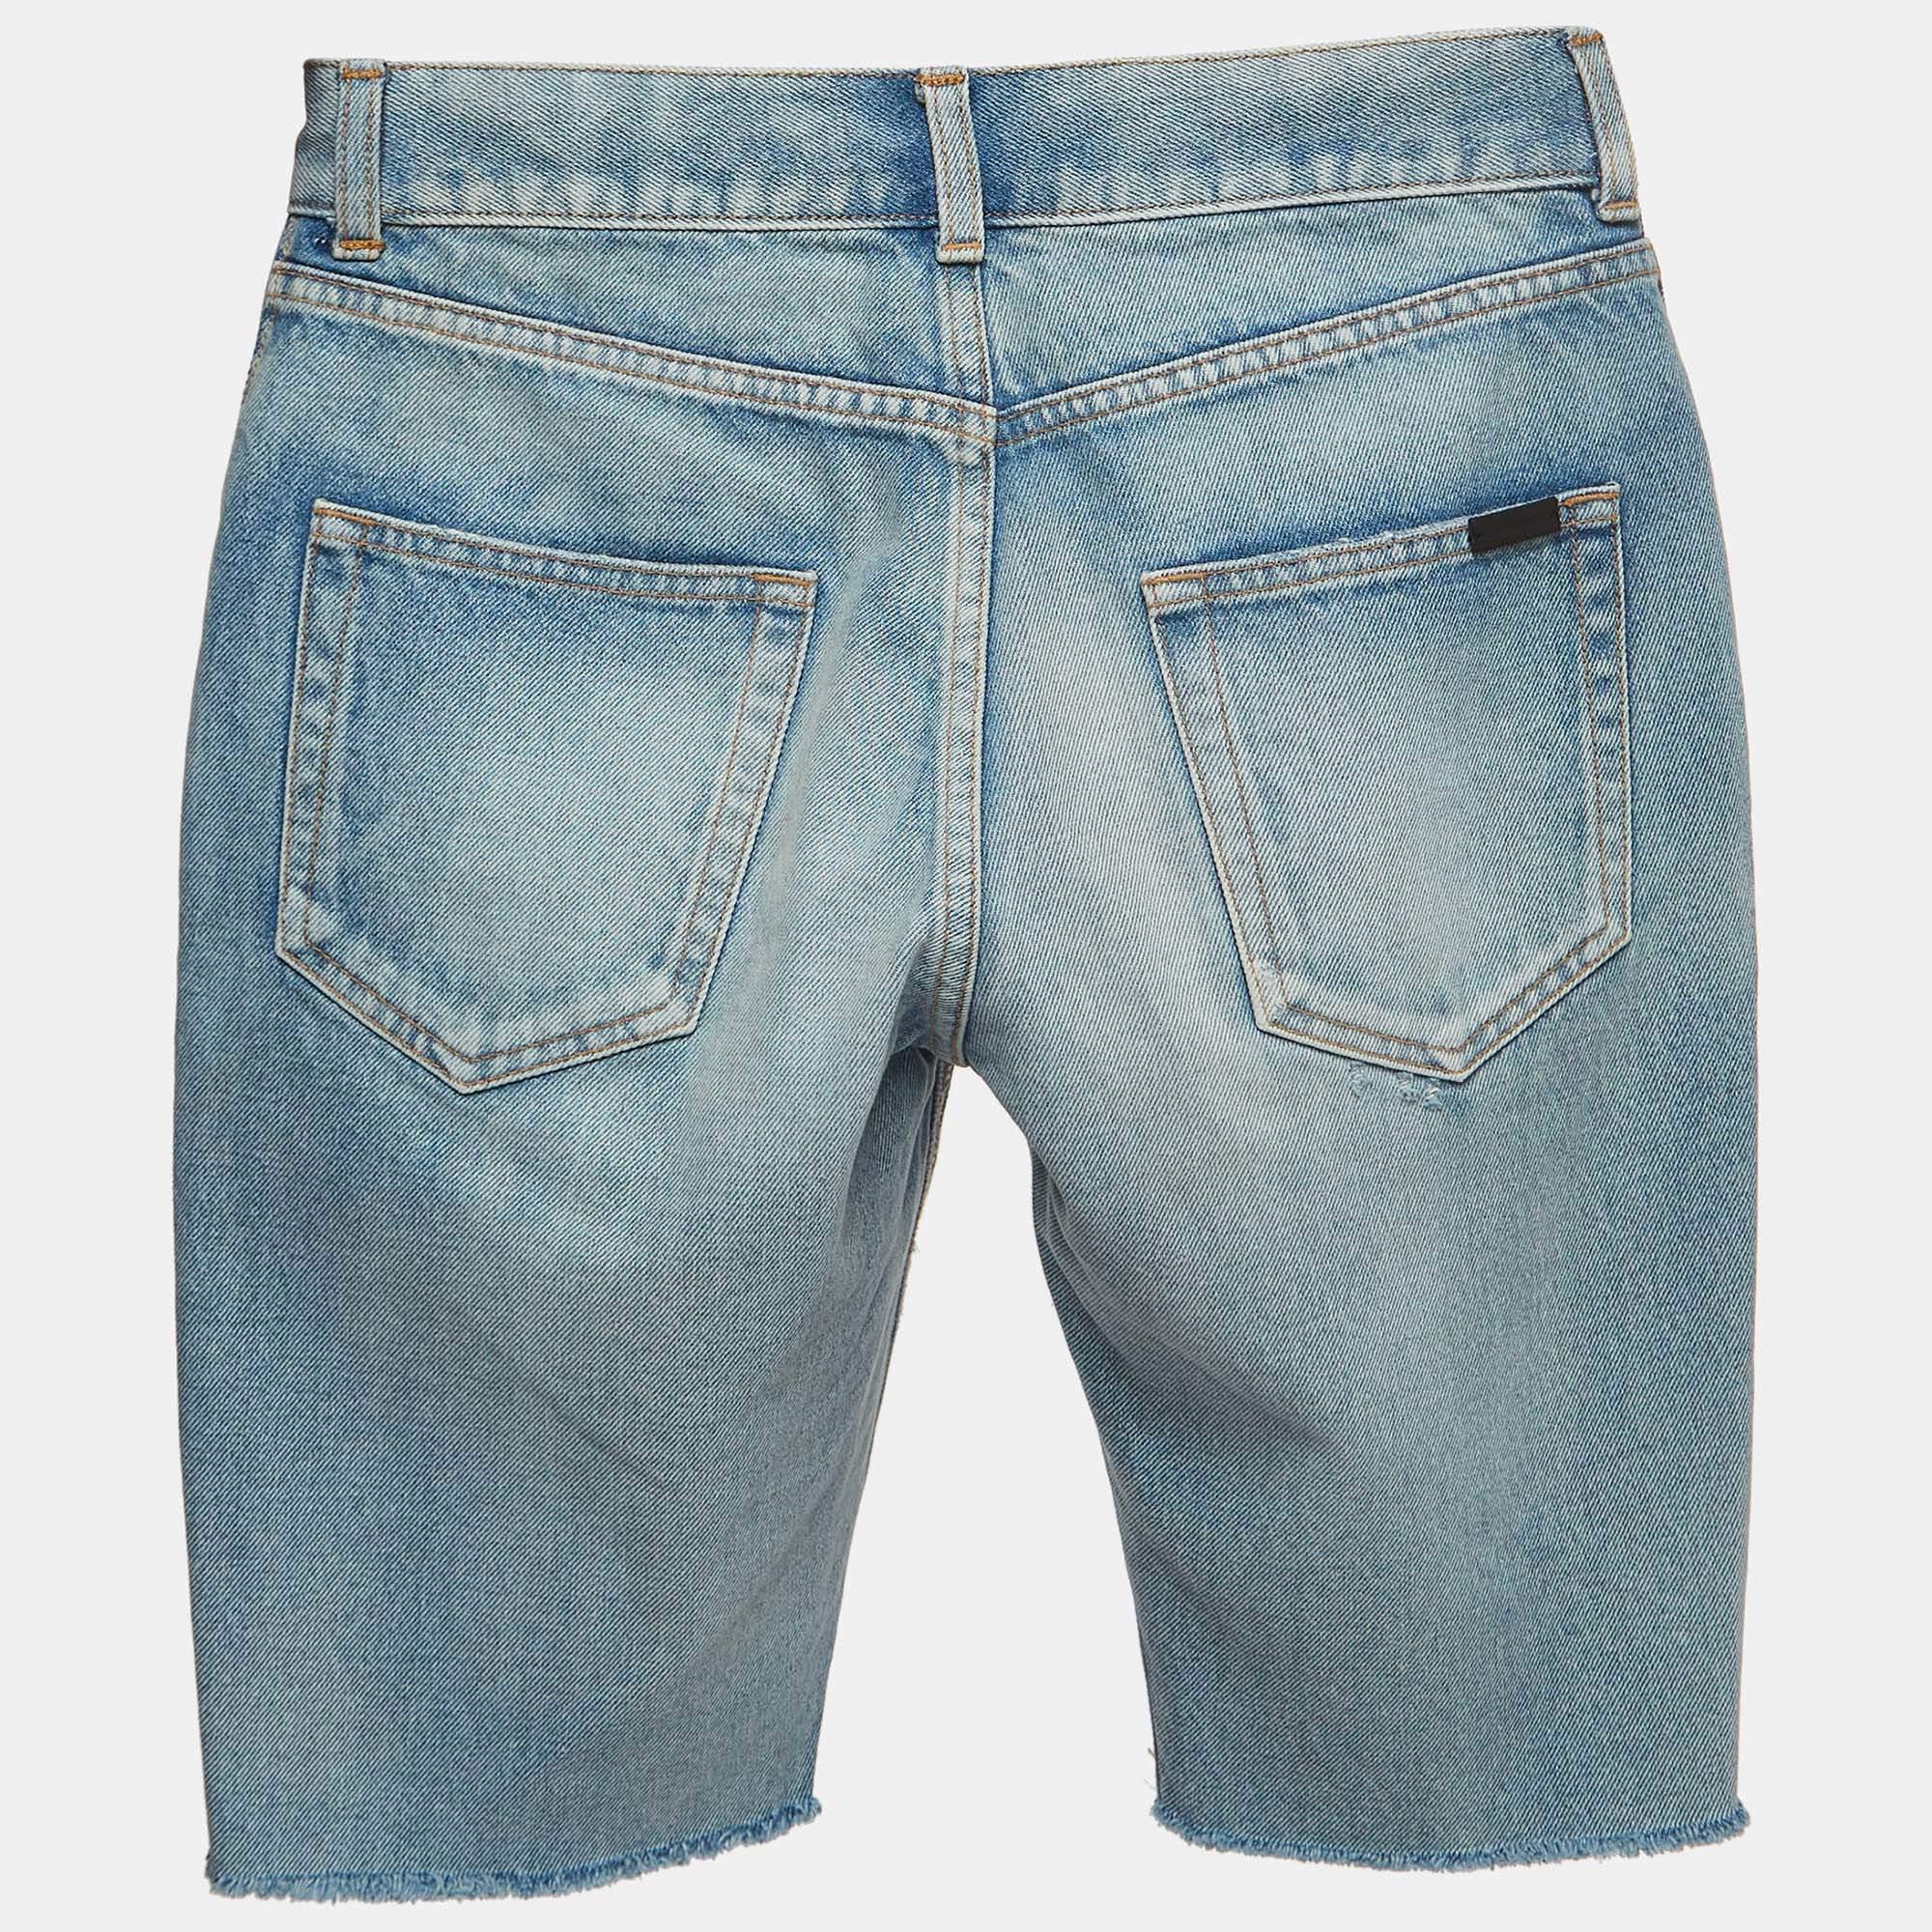 Now lounge around in comfort with these shorts from Saint Laurent. The shorts are tailored from cotton and feature a simple design. They come with belt loops on the waist, a buttoned closure, and multiple pockets.

